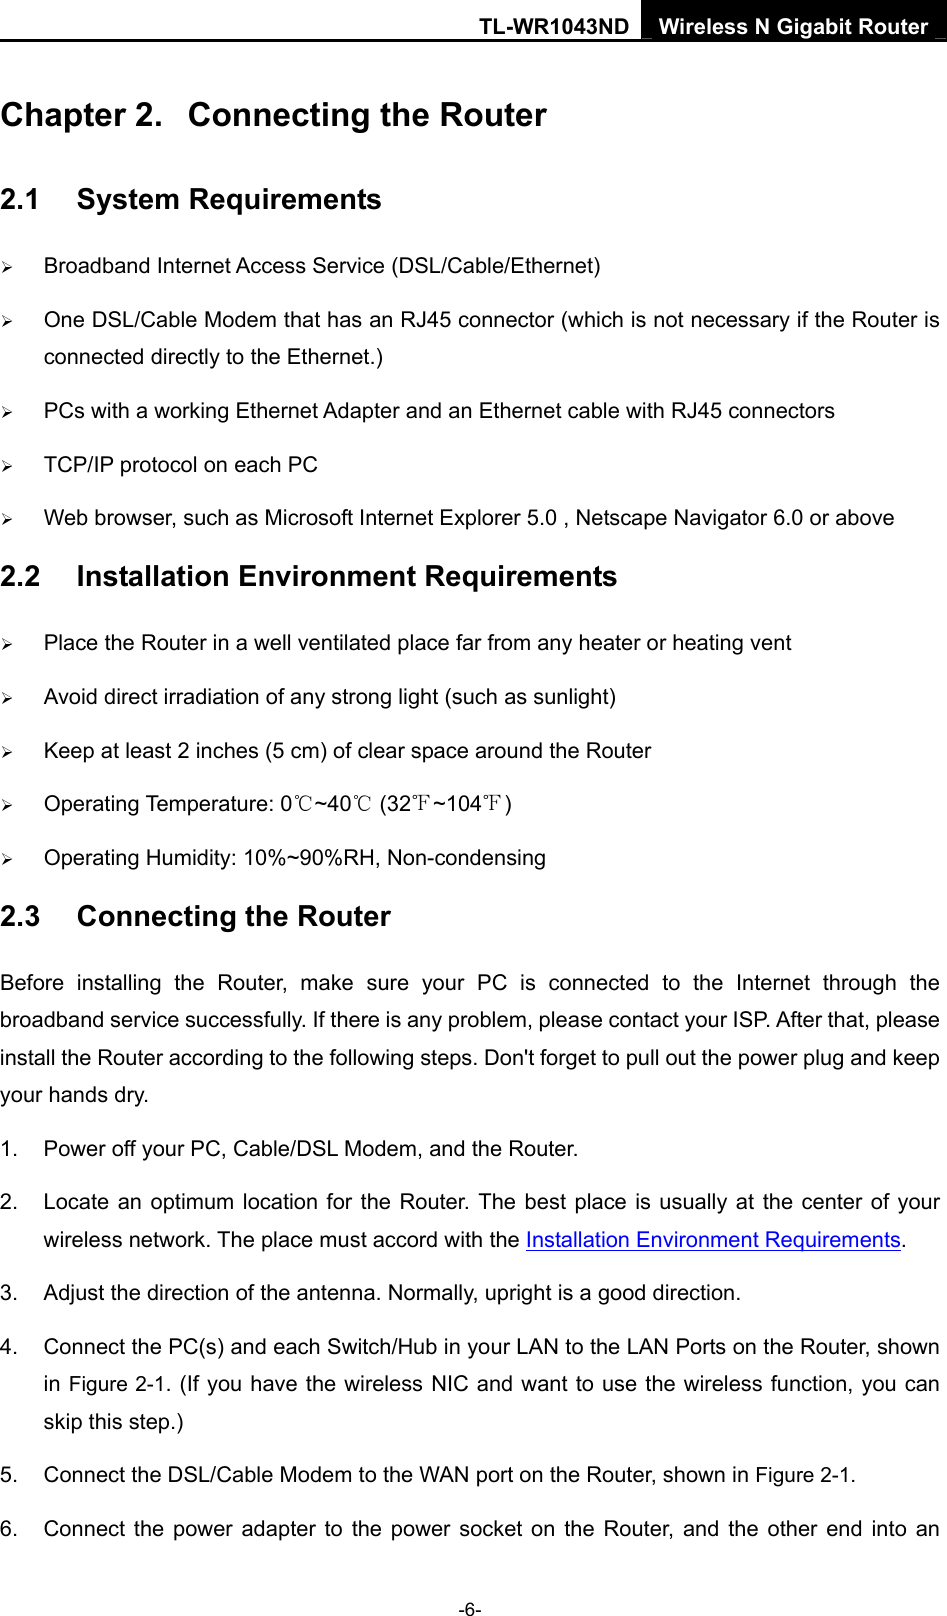 TL-WR1043ND Wireless N Gigabit Router  -6- Chapter 2.  Connecting the Router 2.1  System Requirements ¾ Broadband Internet Access Service (DSL/Cable/Ethernet) ¾ One DSL/Cable Modem that has an RJ45 connector (which is not necessary if the Router is connected directly to the Ethernet.) ¾ PCs with a working Ethernet Adapter and an Ethernet cable with RJ45 connectors   ¾ TCP/IP protocol on each PC ¾ Web browser, such as Microsoft Internet Explorer 5.0 , Netscape Navigator 6.0 or above 2.2  Installation Environment Requirements ¾ Place the Router in a well ventilated place far from any heater or heating vent   ¾ Avoid direct irradiation of any strong light (such as sunlight) ¾ Keep at least 2 inches (5 cm) of clear space around the Router ¾ Operating Temperature: 0 ~40  (32 ~104 )℃℃℉ ℉ ¾ Operating Humidity: 10%~90%RH, Non-condensing 2.3  Connecting the Router Before installing the Router, make sure your PC is connected to the Internet through the broadband service successfully. If there is any problem, please contact your ISP. After that, please install the Router according to the following steps. Don&apos;t forget to pull out the power plug and keep your hands dry. 1.  Power off your PC, Cable/DSL Modem, and the Router.   2.  Locate an optimum location for the Router. The best place is usually at the center of your wireless network. The place must accord with the Installation Environment Requirements.  3.  Adjust the direction of the antenna. Normally, upright is a good direction. 4.  Connect the PC(s) and each Switch/Hub in your LAN to the LAN Ports on the Router, shown in Figure 2-1. (If you have the wireless NIC and want to use the wireless function, you can skip this step.) 5.  Connect the DSL/Cable Modem to the WAN port on the Router, shown in Figure 2-1. 6.  Connect the power adapter to the power socket on the Router, and the other end into an 